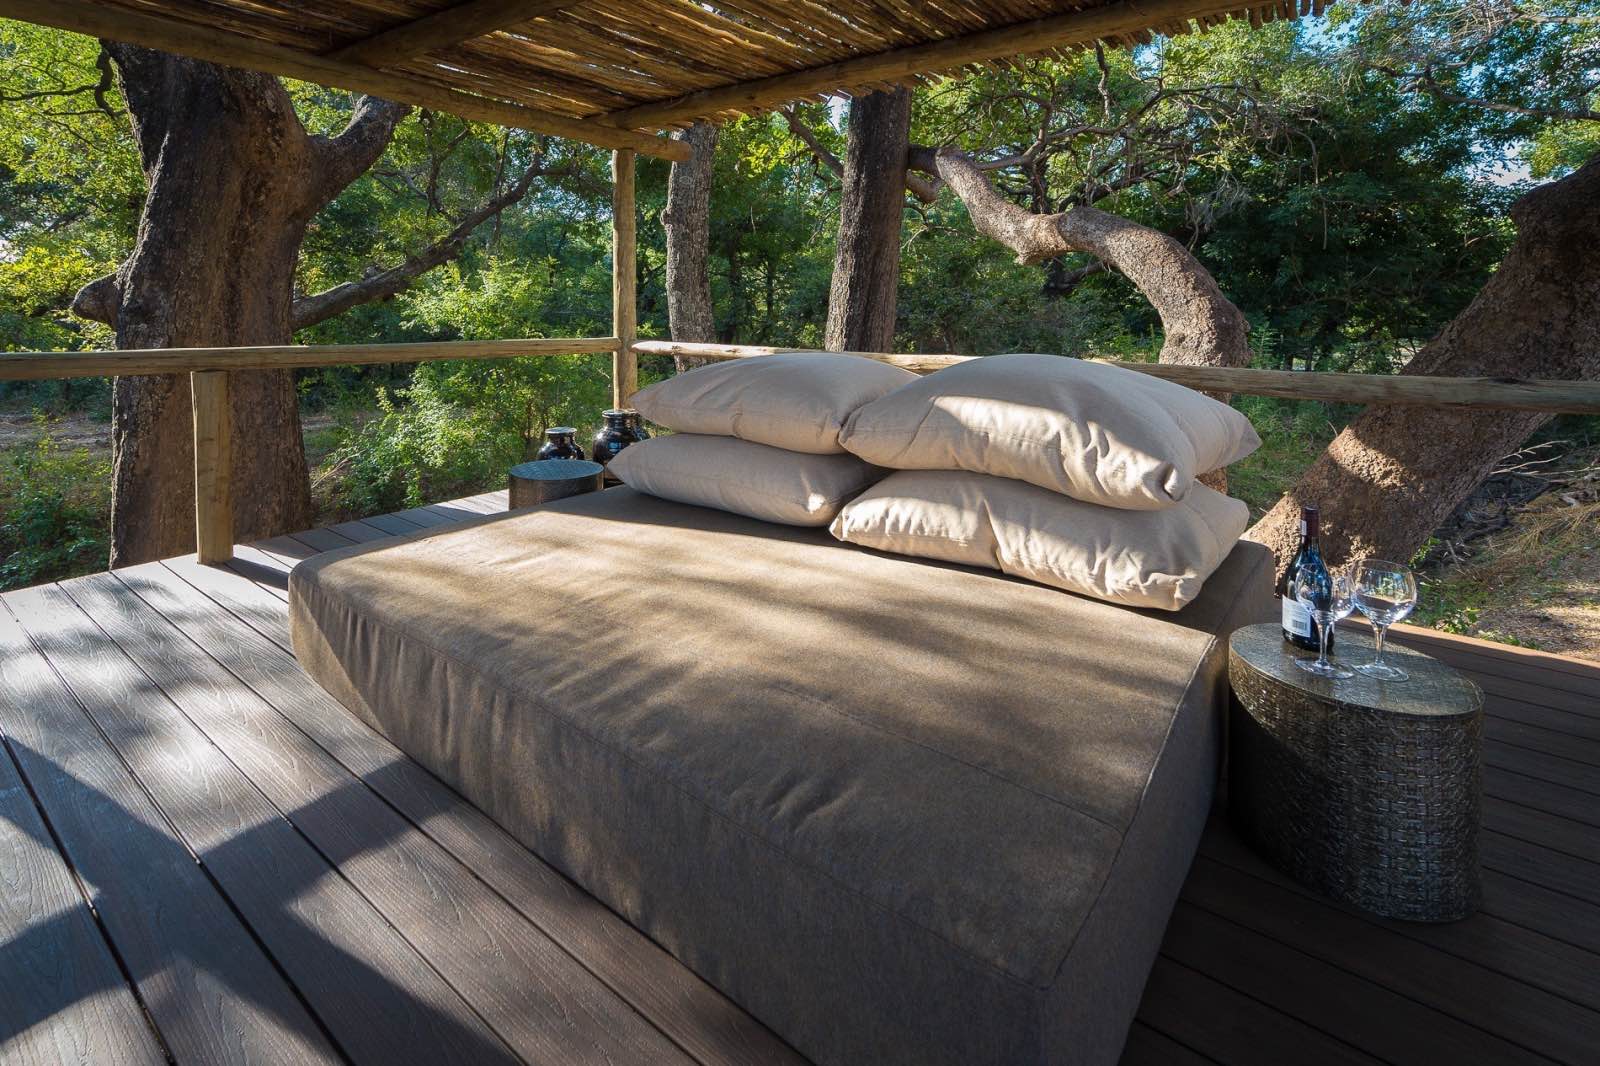 Incredible tree-house-style experience in this star bed at Chamilandu